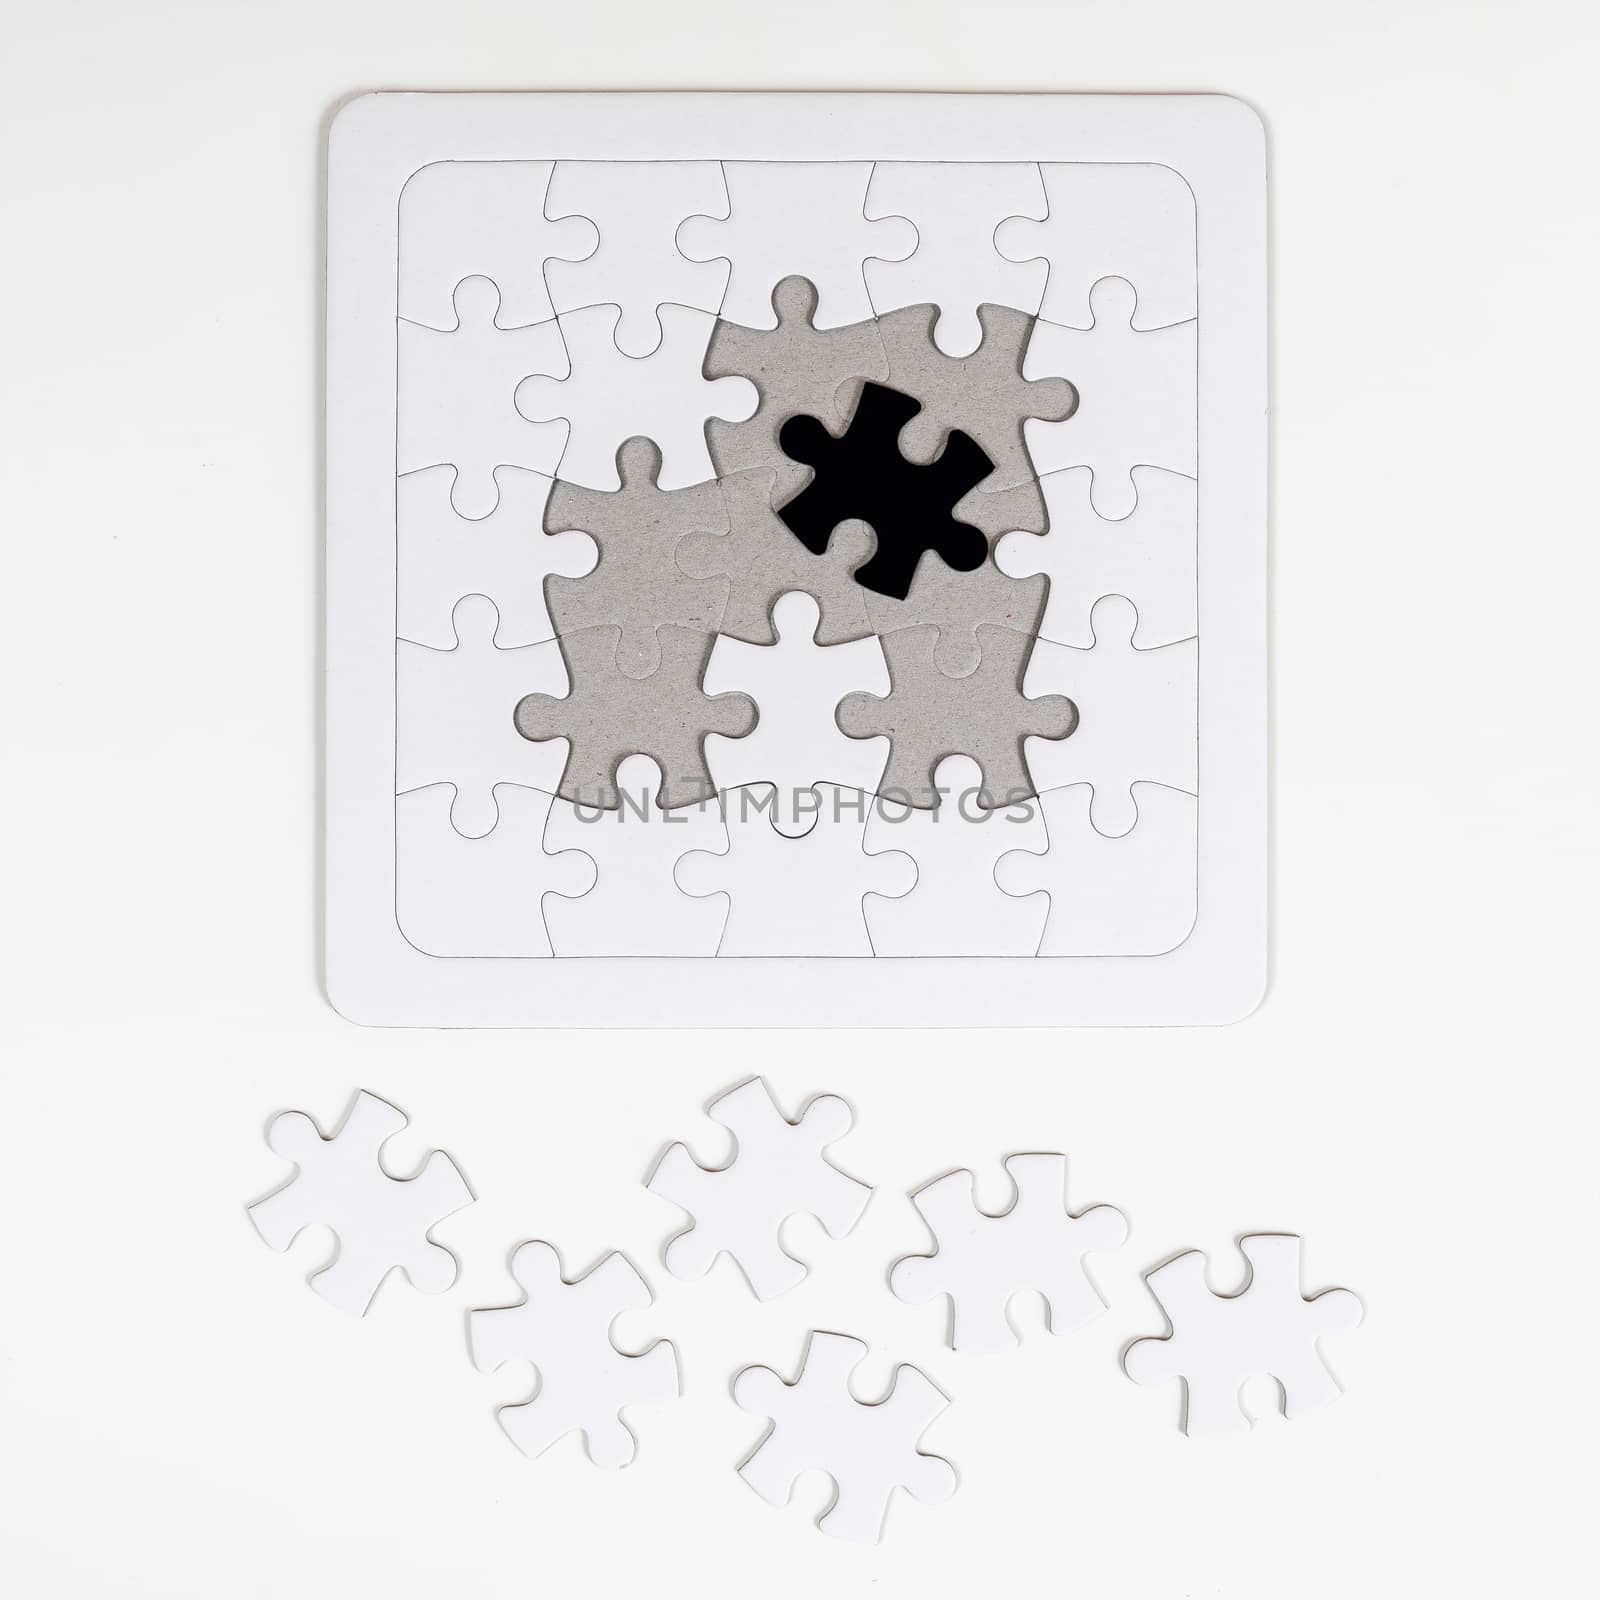 the incomplete puzzle with a black piece